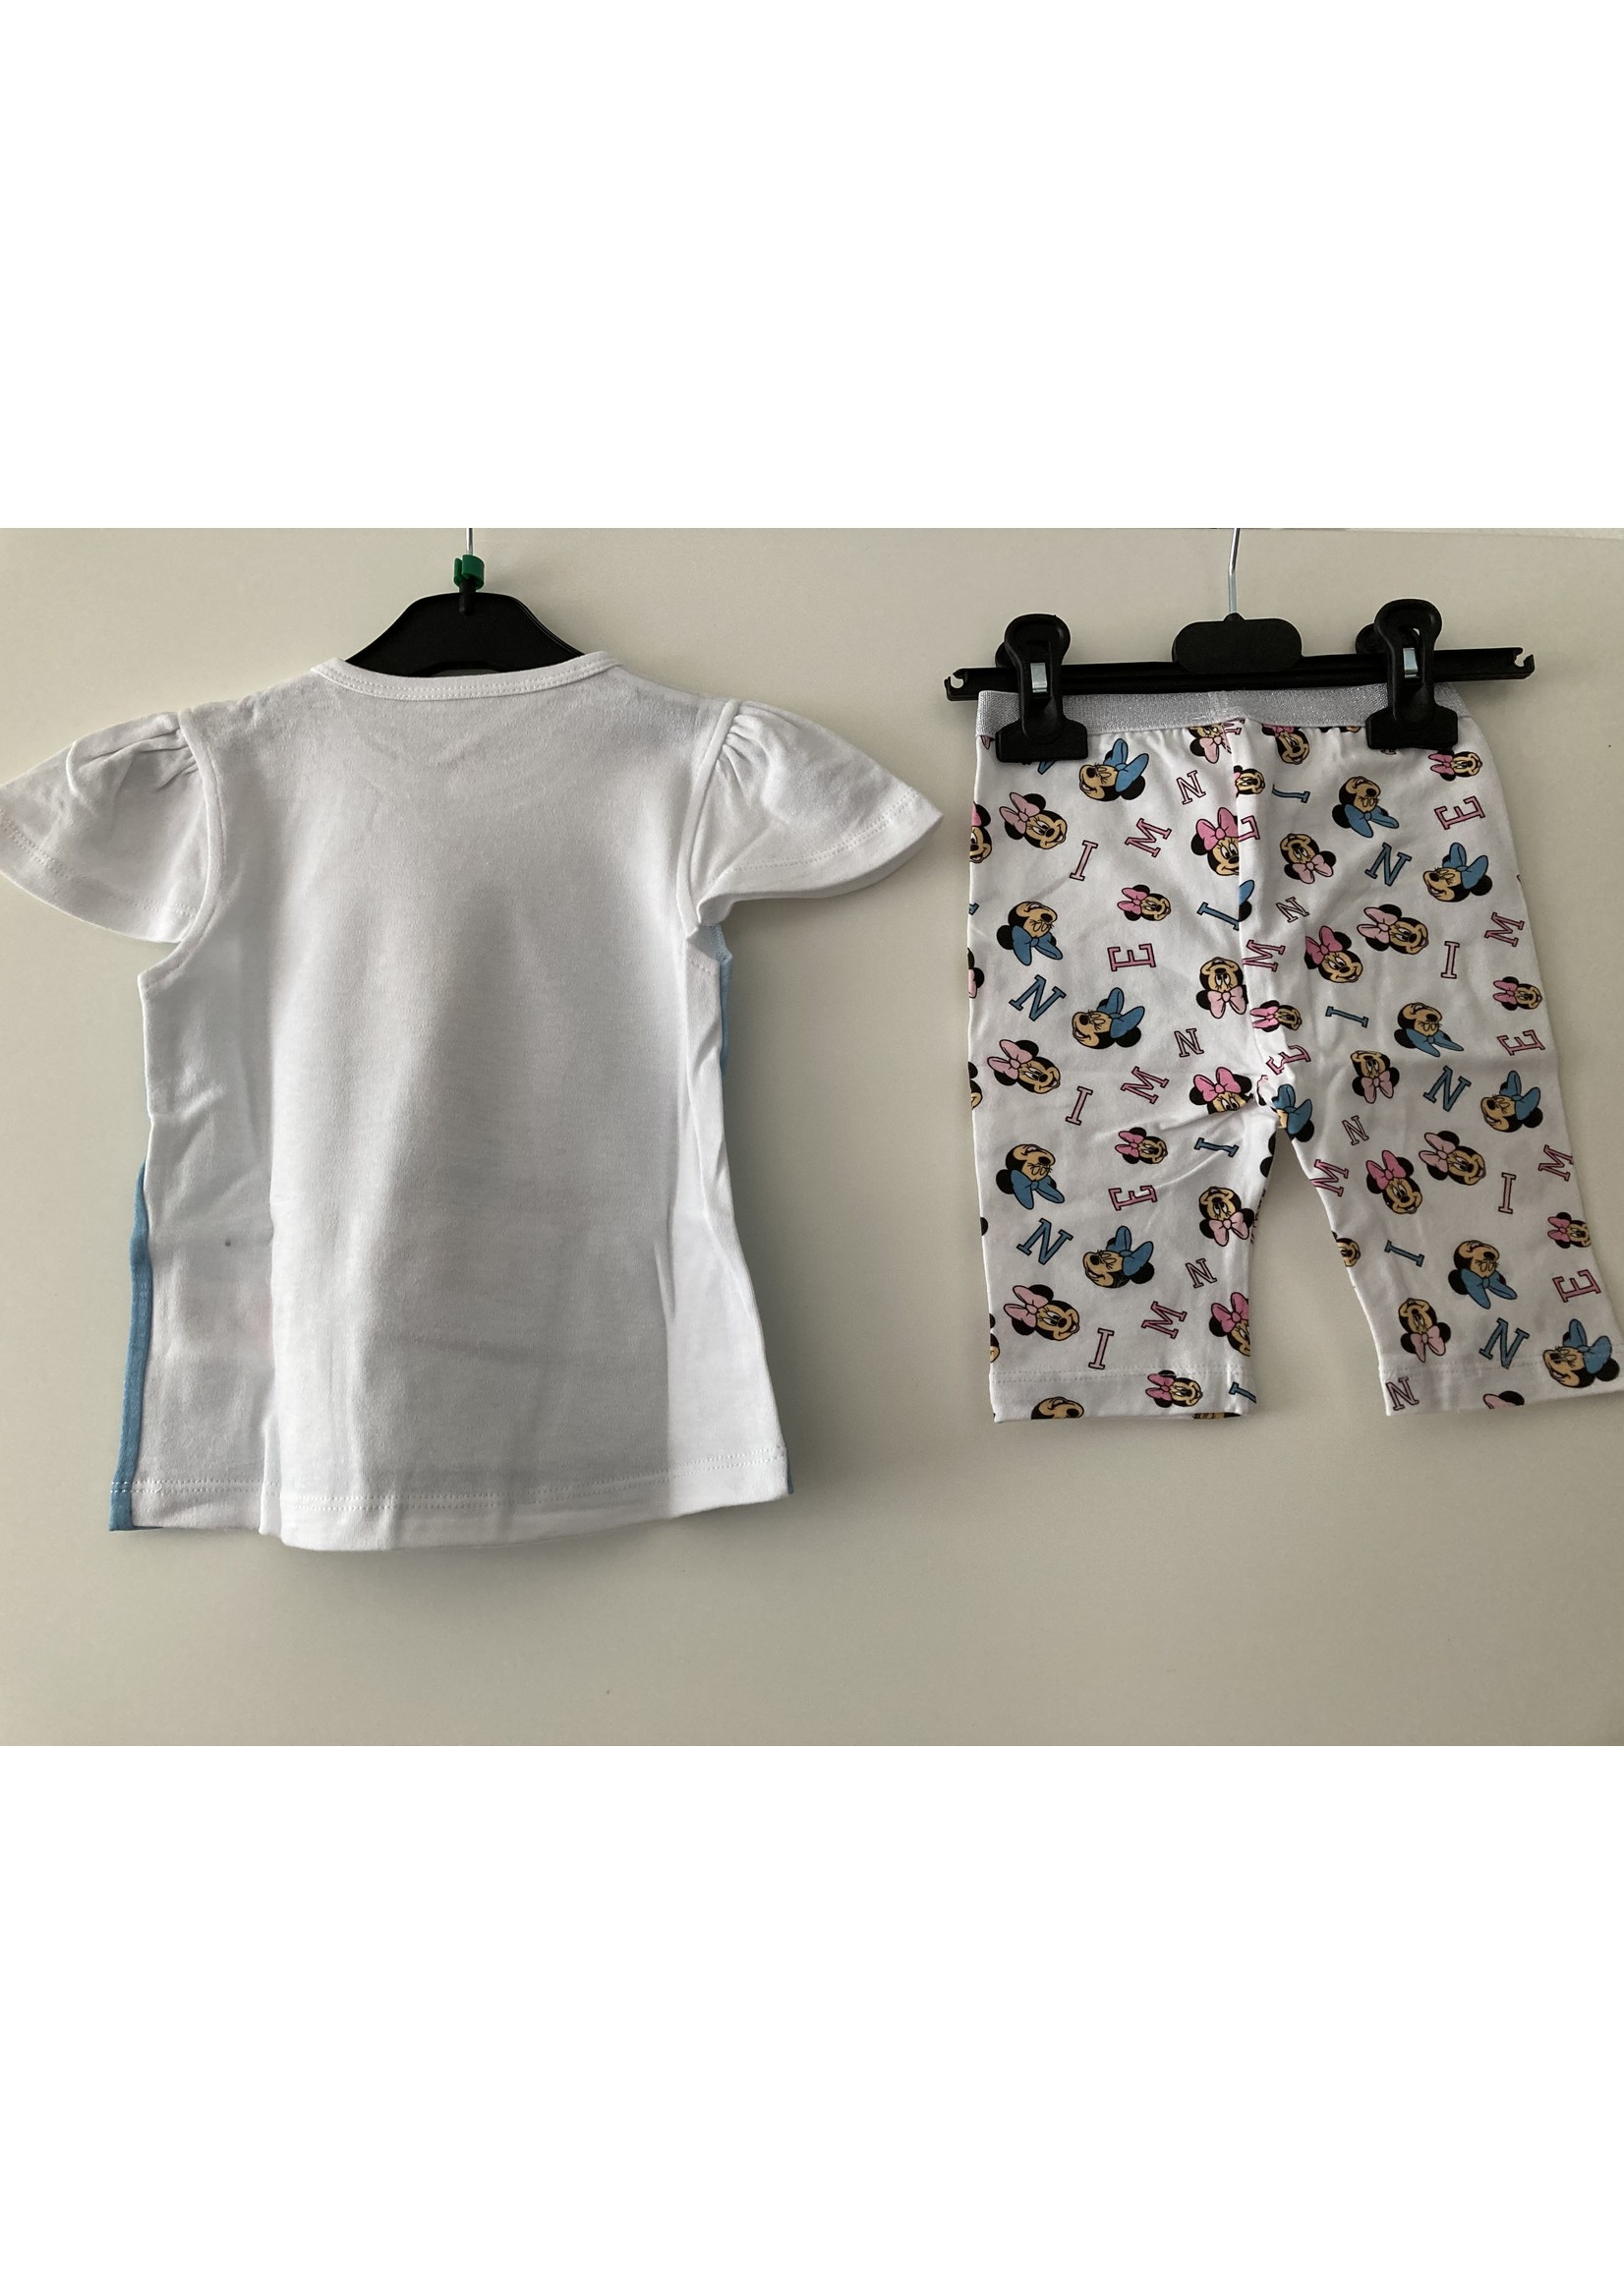 Disney baby Minnie Mouse summer set from Disney baby blue